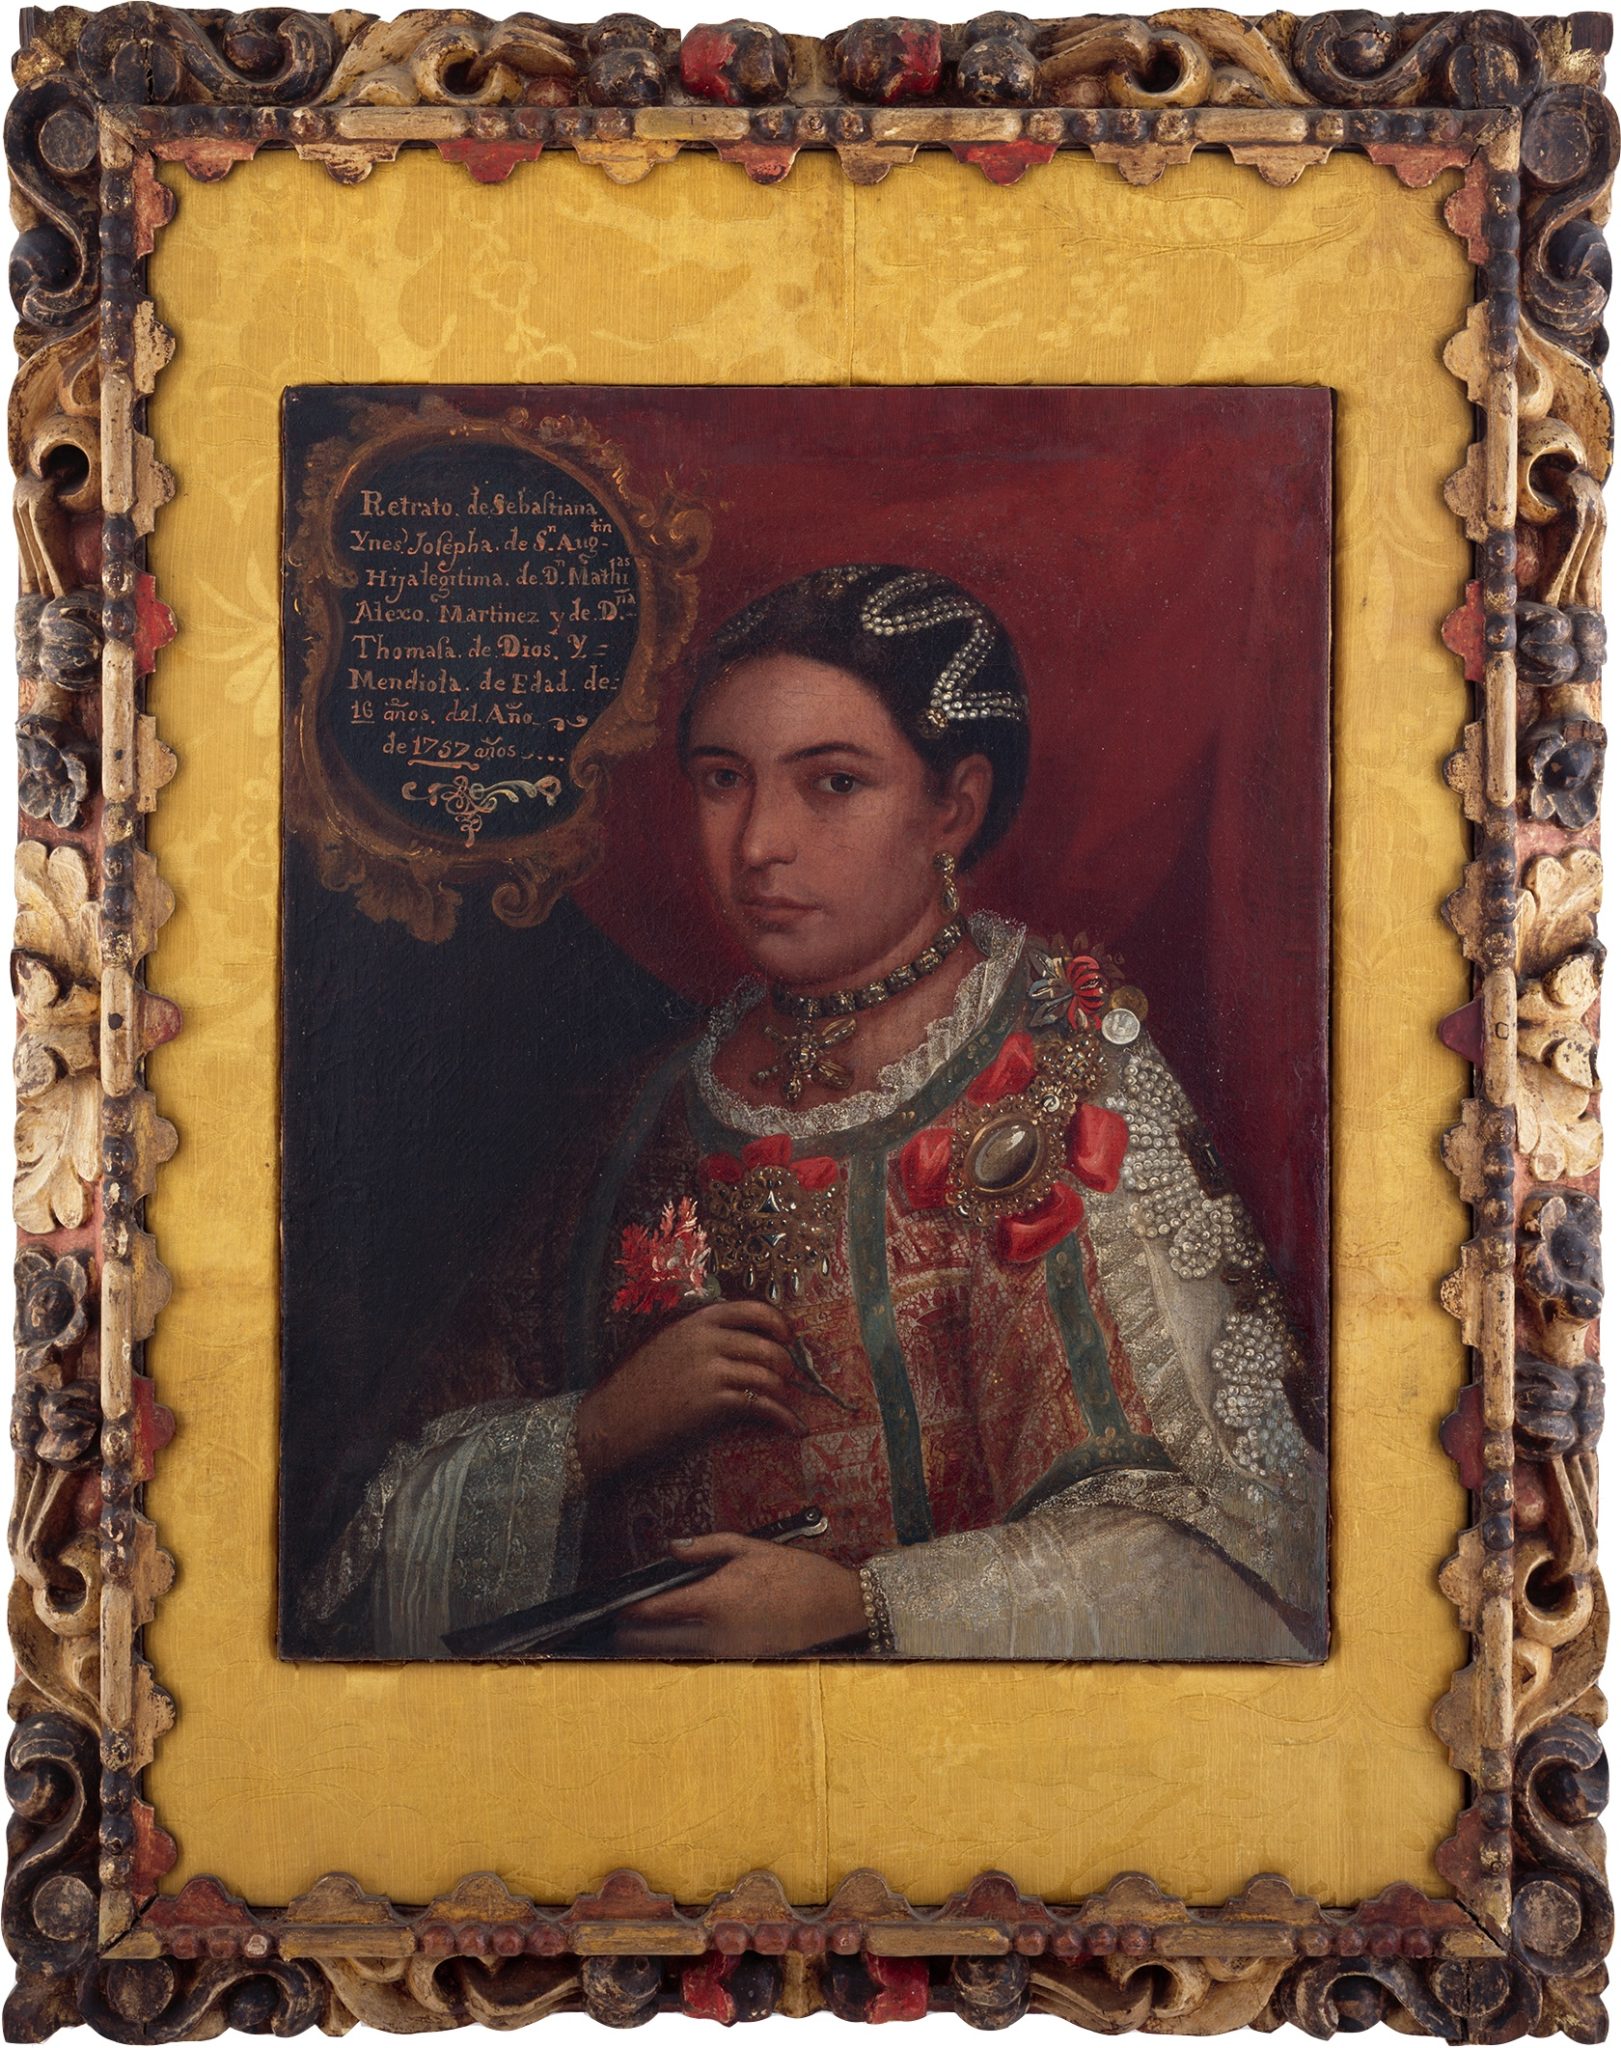 An 18th-century painting of an Indigenous girl wearing an ornate dress, clutching a flower